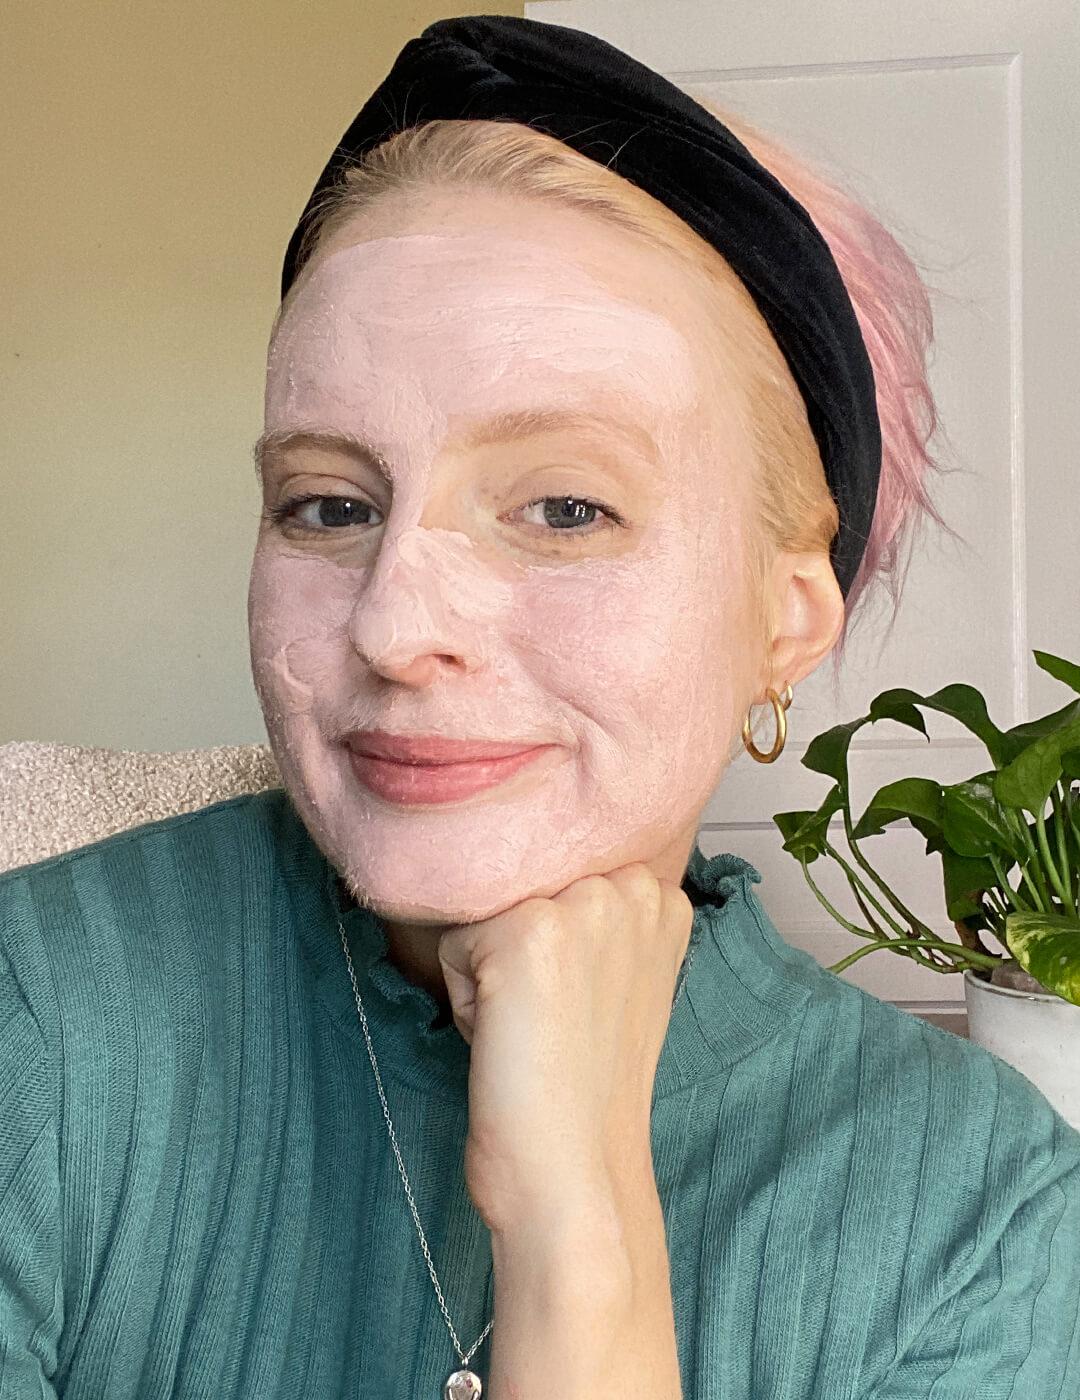 Hannah Cassidy in a green sweater and black headband posing with pink mud mask on her face